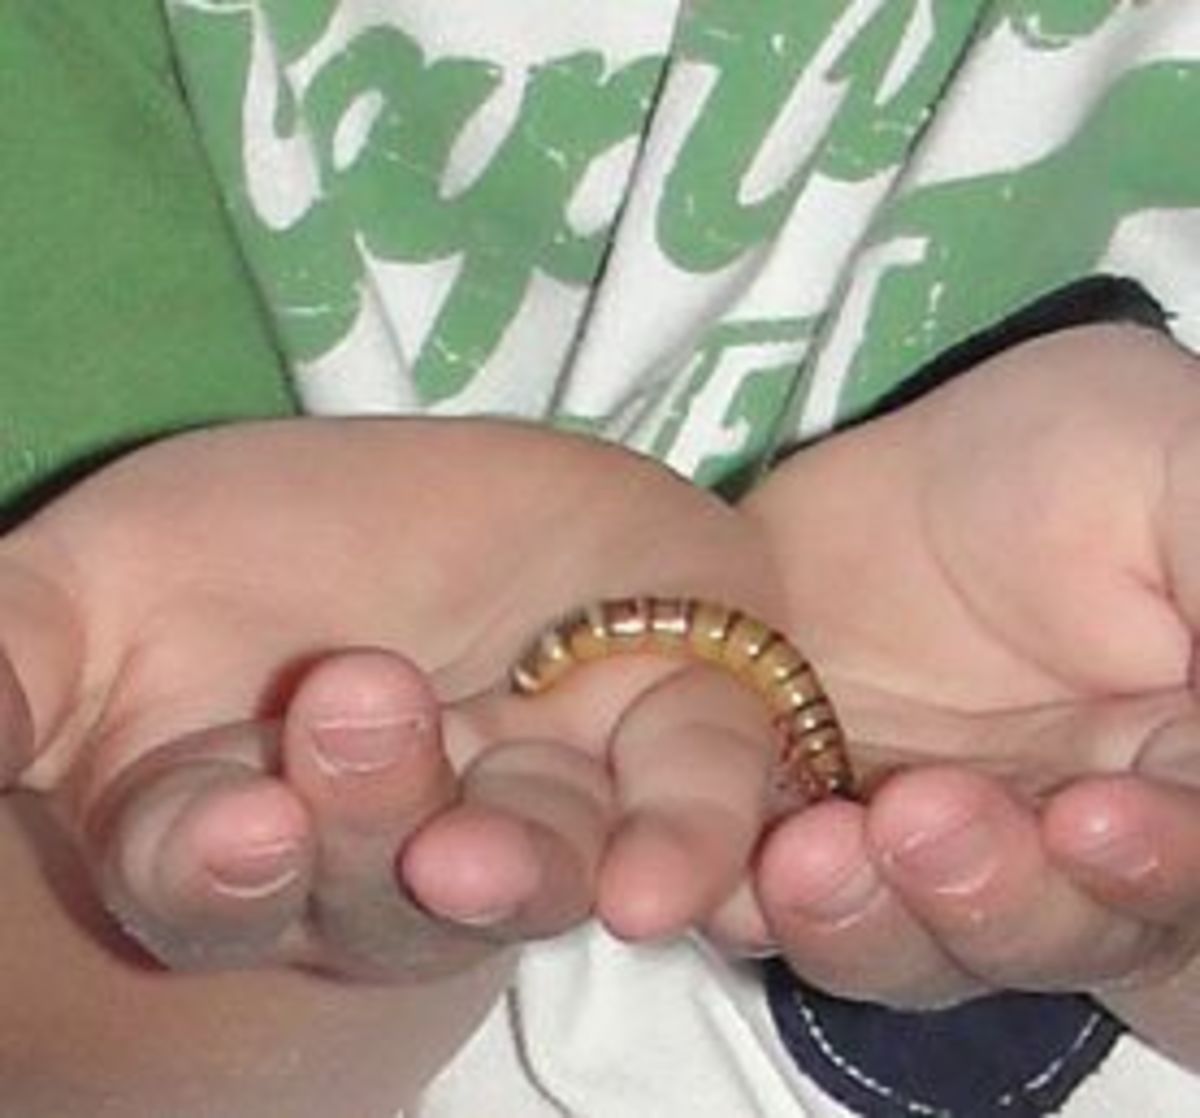 Holding mealworms